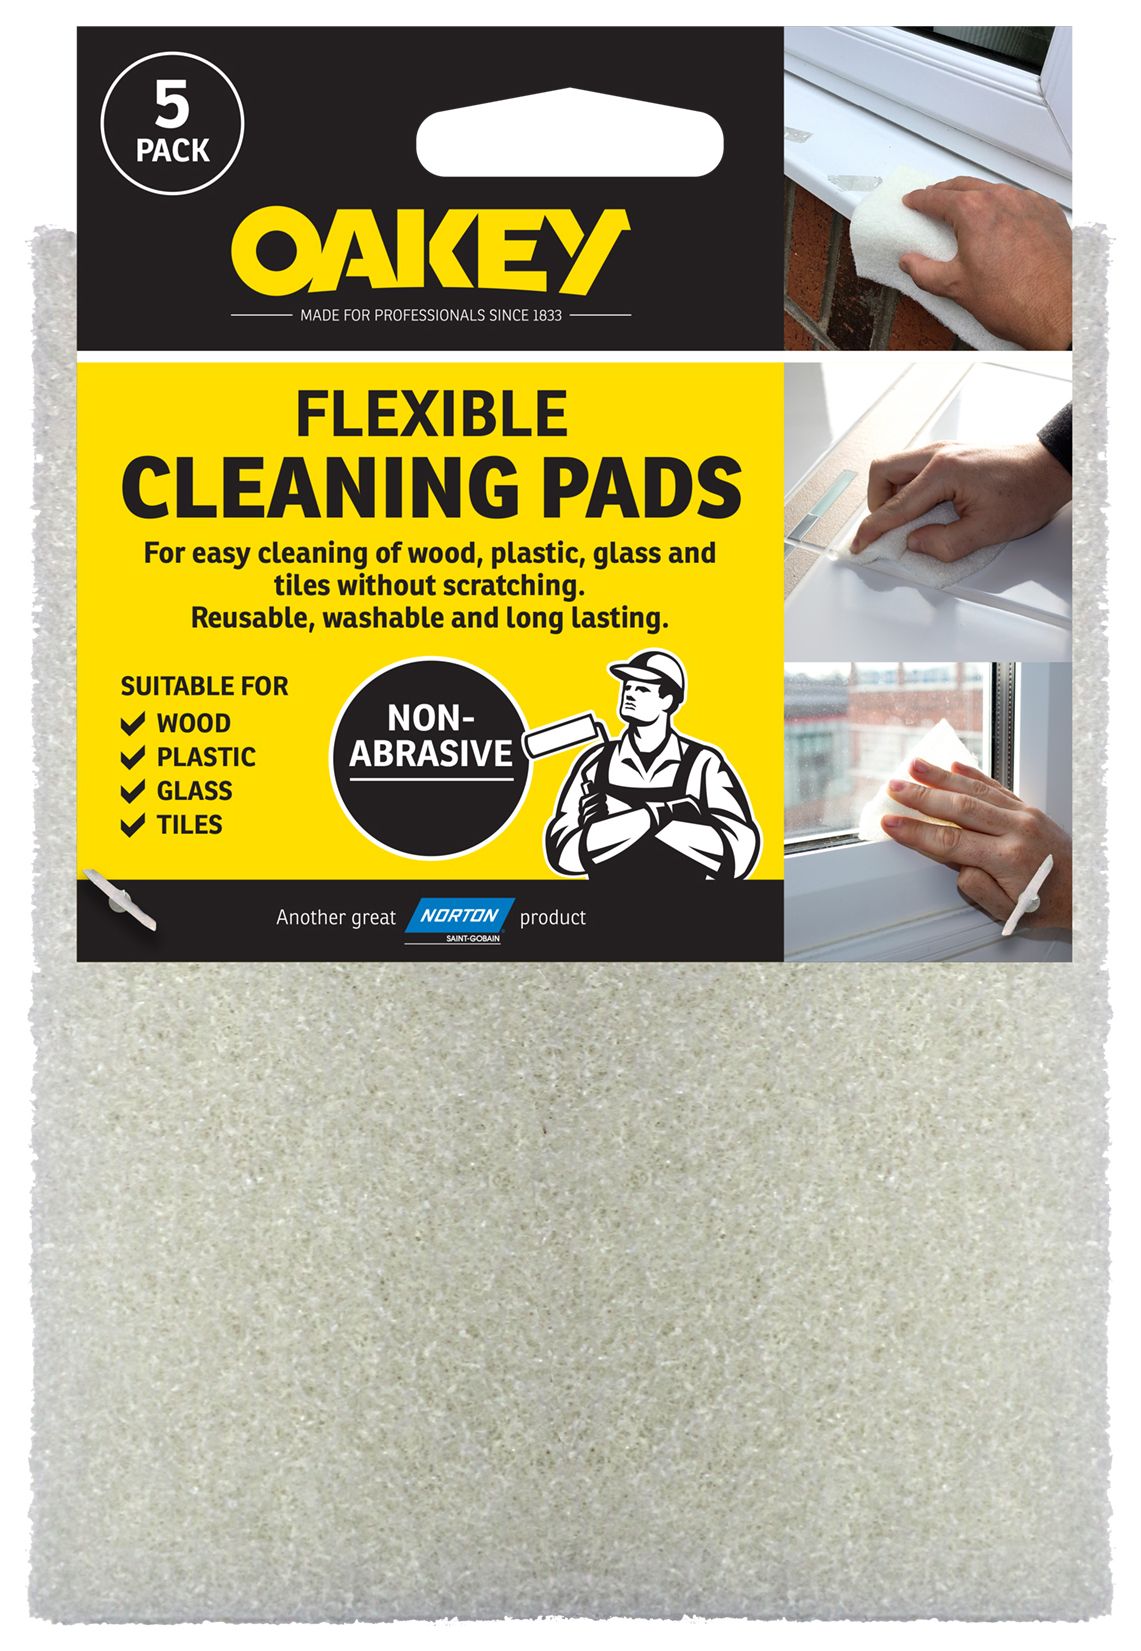 Image of Oakey Flexible Cleaning Pads - Pack of 5